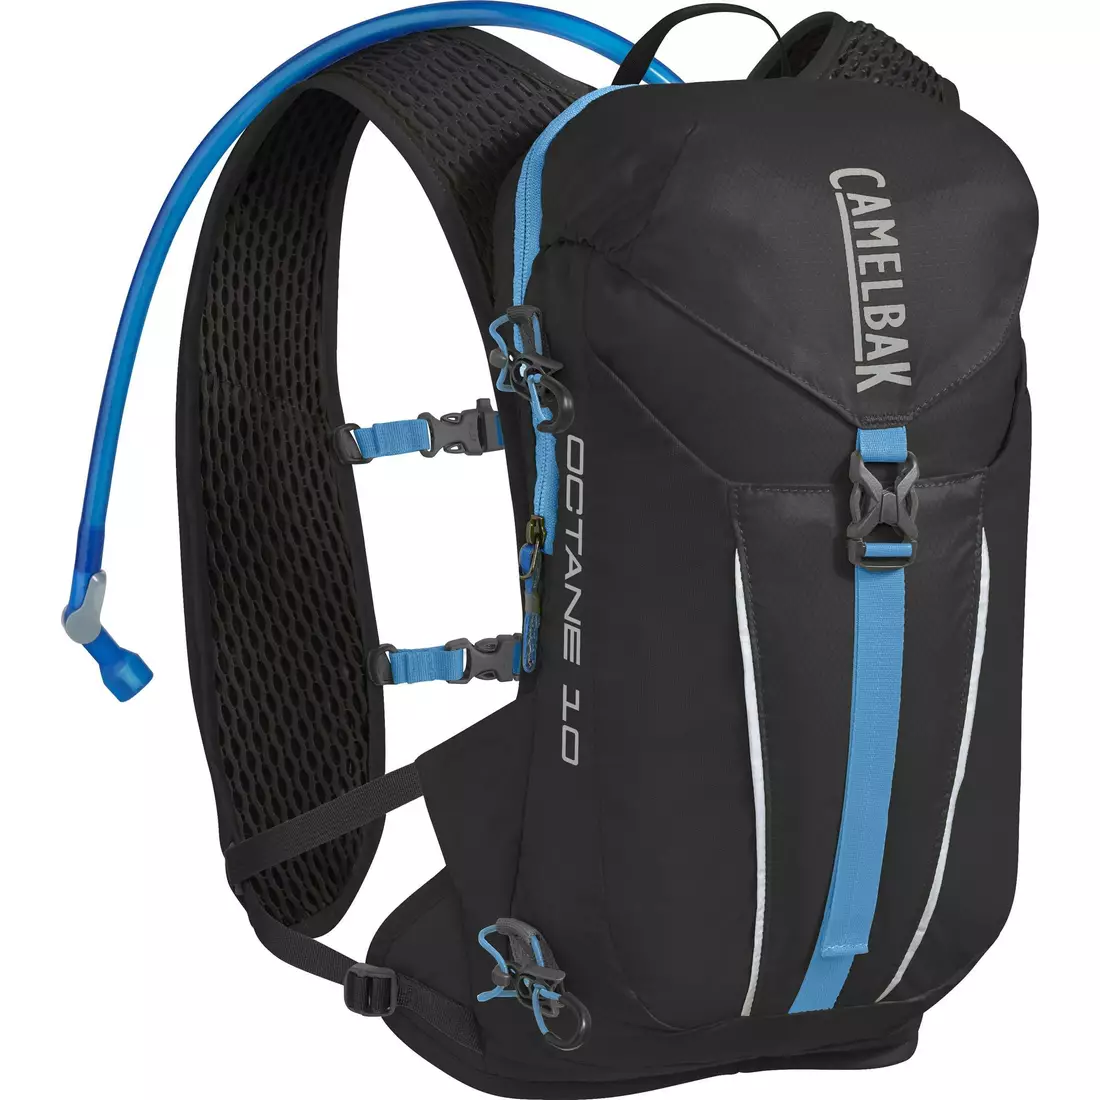 CAMELBAK Backpack / Running / cycling vest with water bag 2L  Octane 10 c1437/001000/UNI